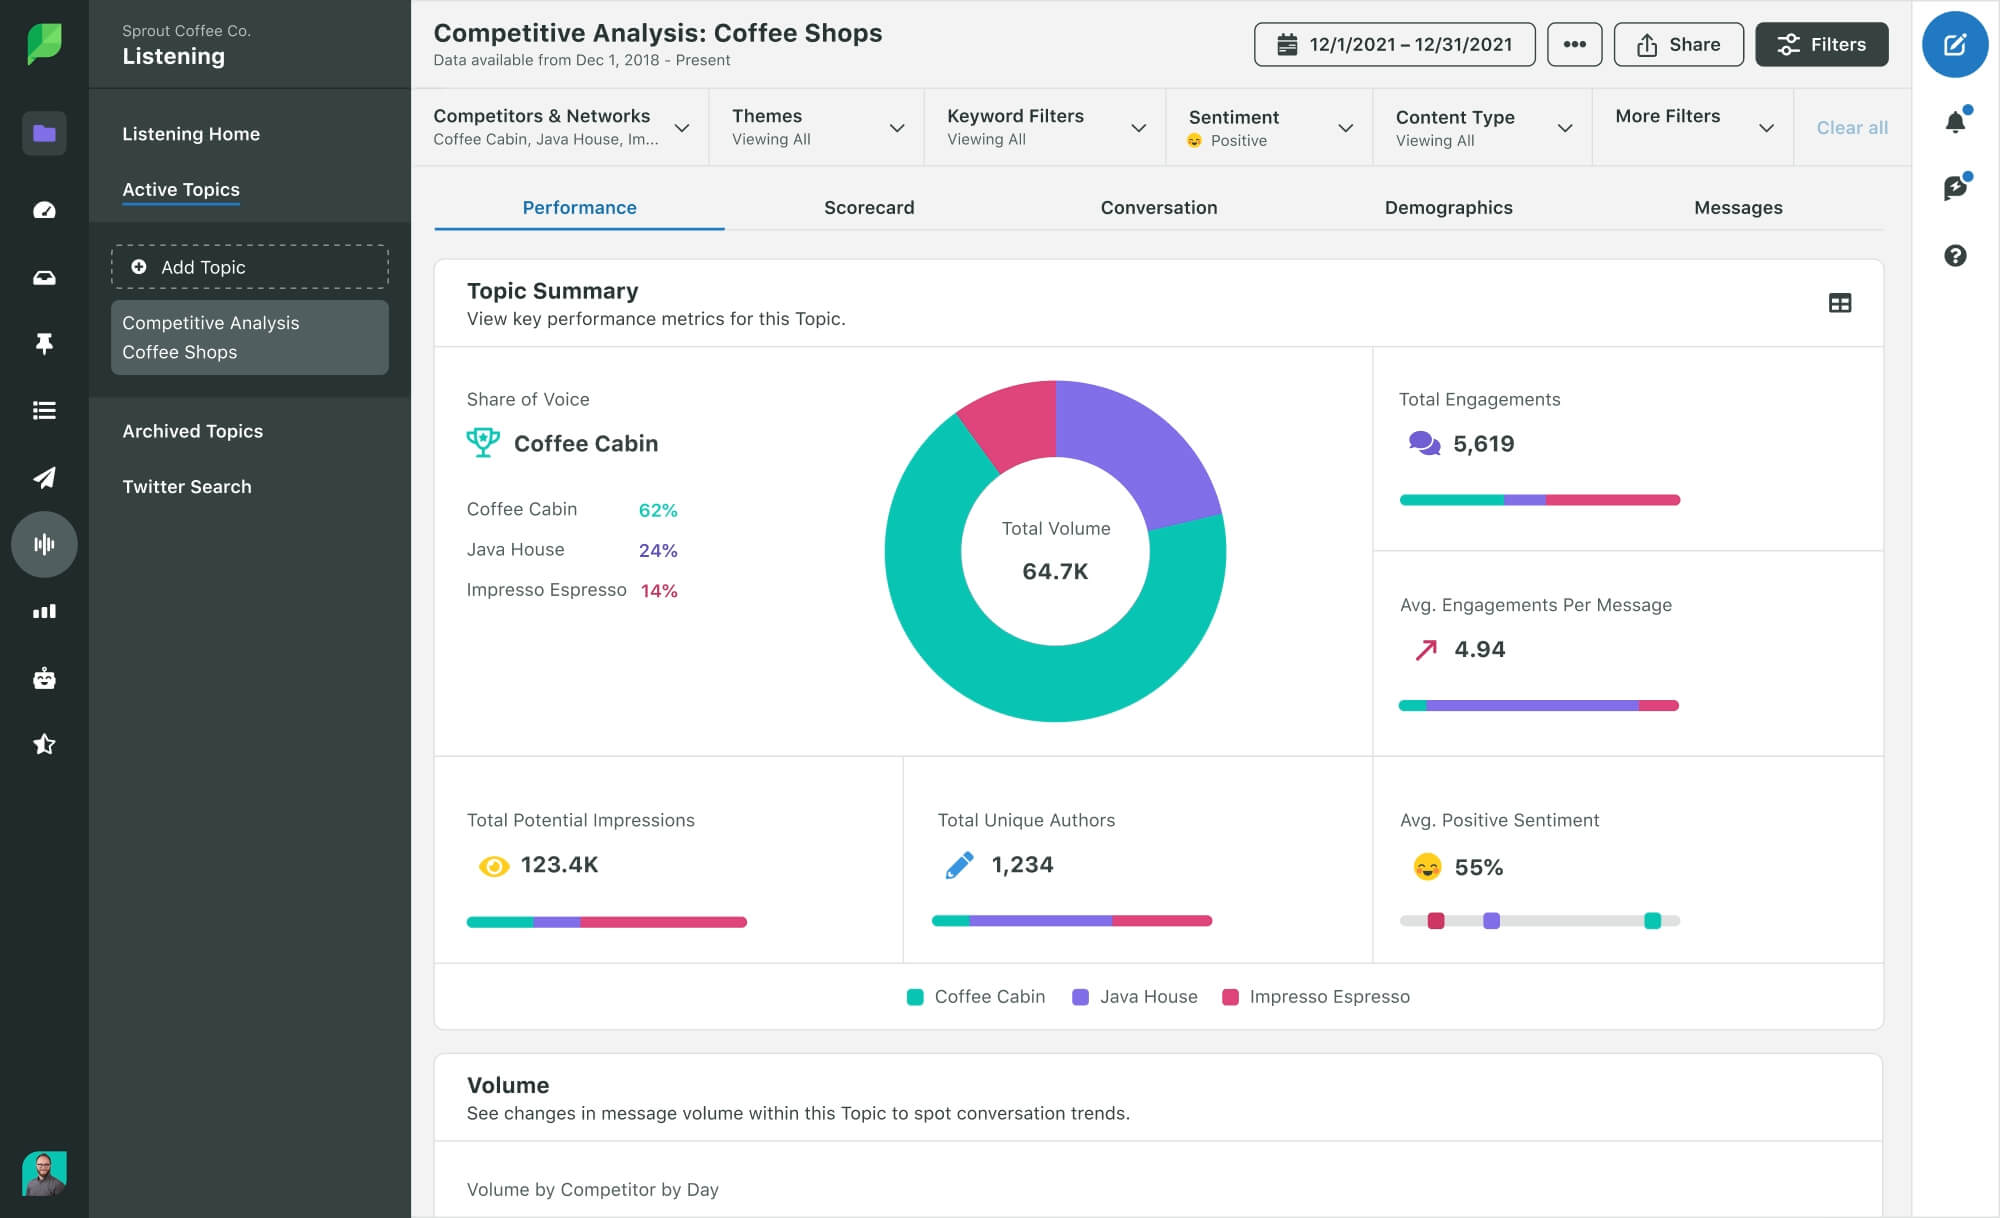 Screenshot of Sprout Social’s competitor analysis performance report showing metrics on various KPIs including topic summary, share of voice, total engagements and sentiment scores based on positive, negative and neutral emotions found in the data.